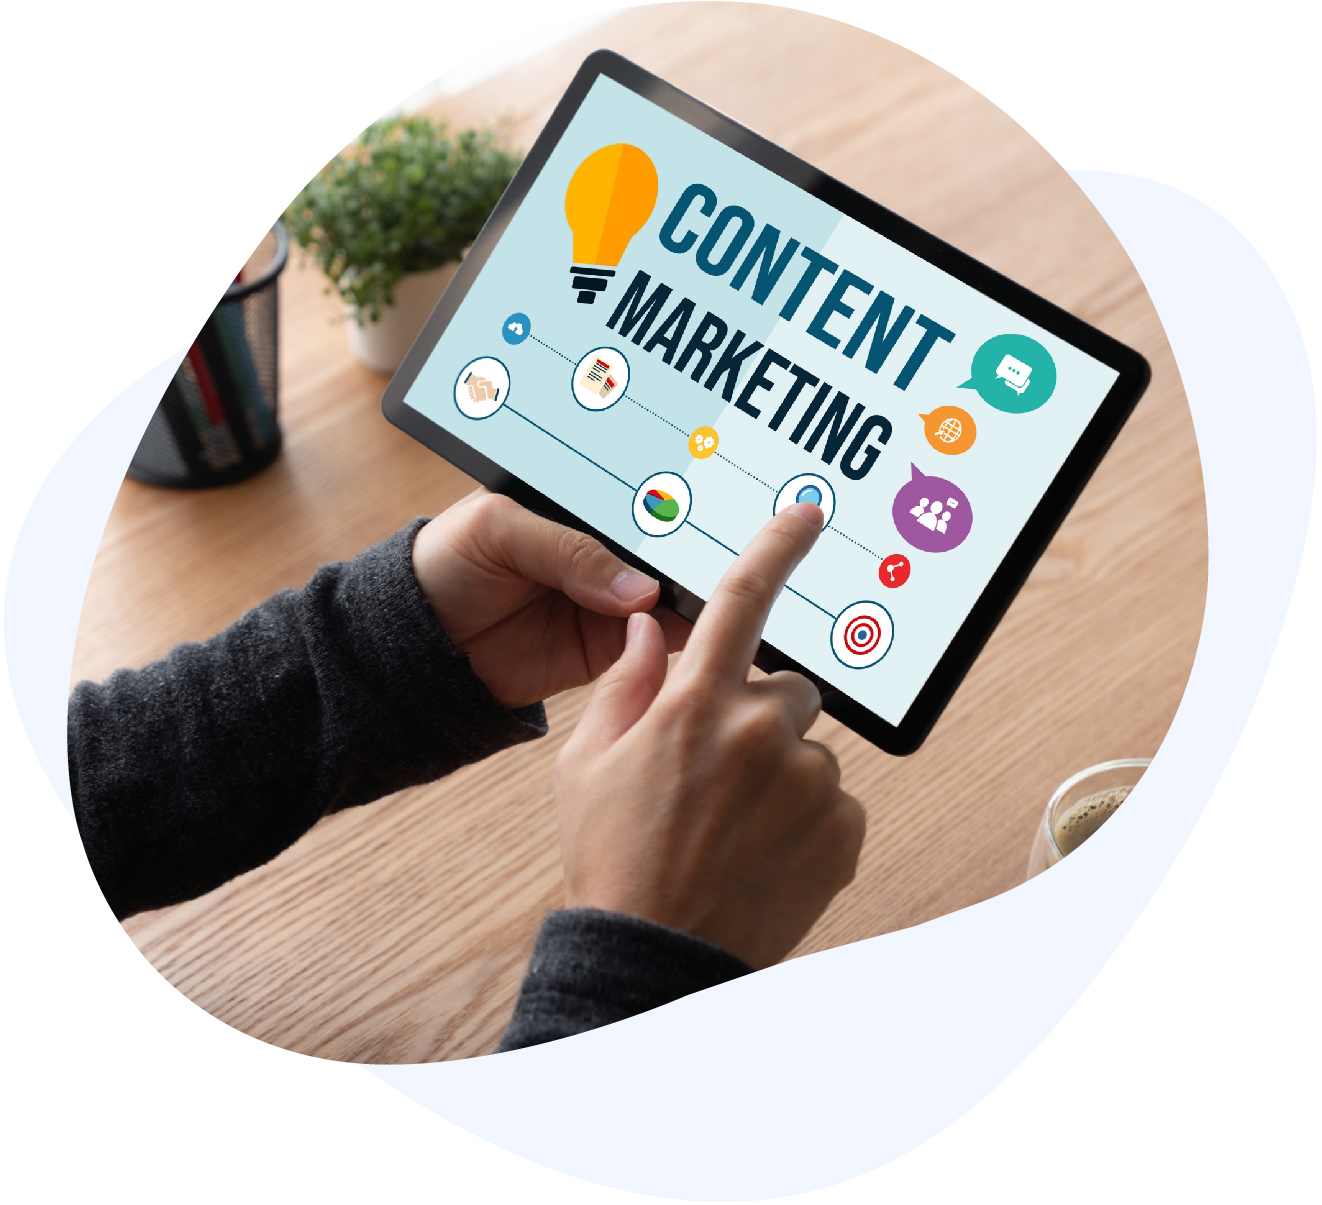 Dedicated Content Marketing Agency in the UK